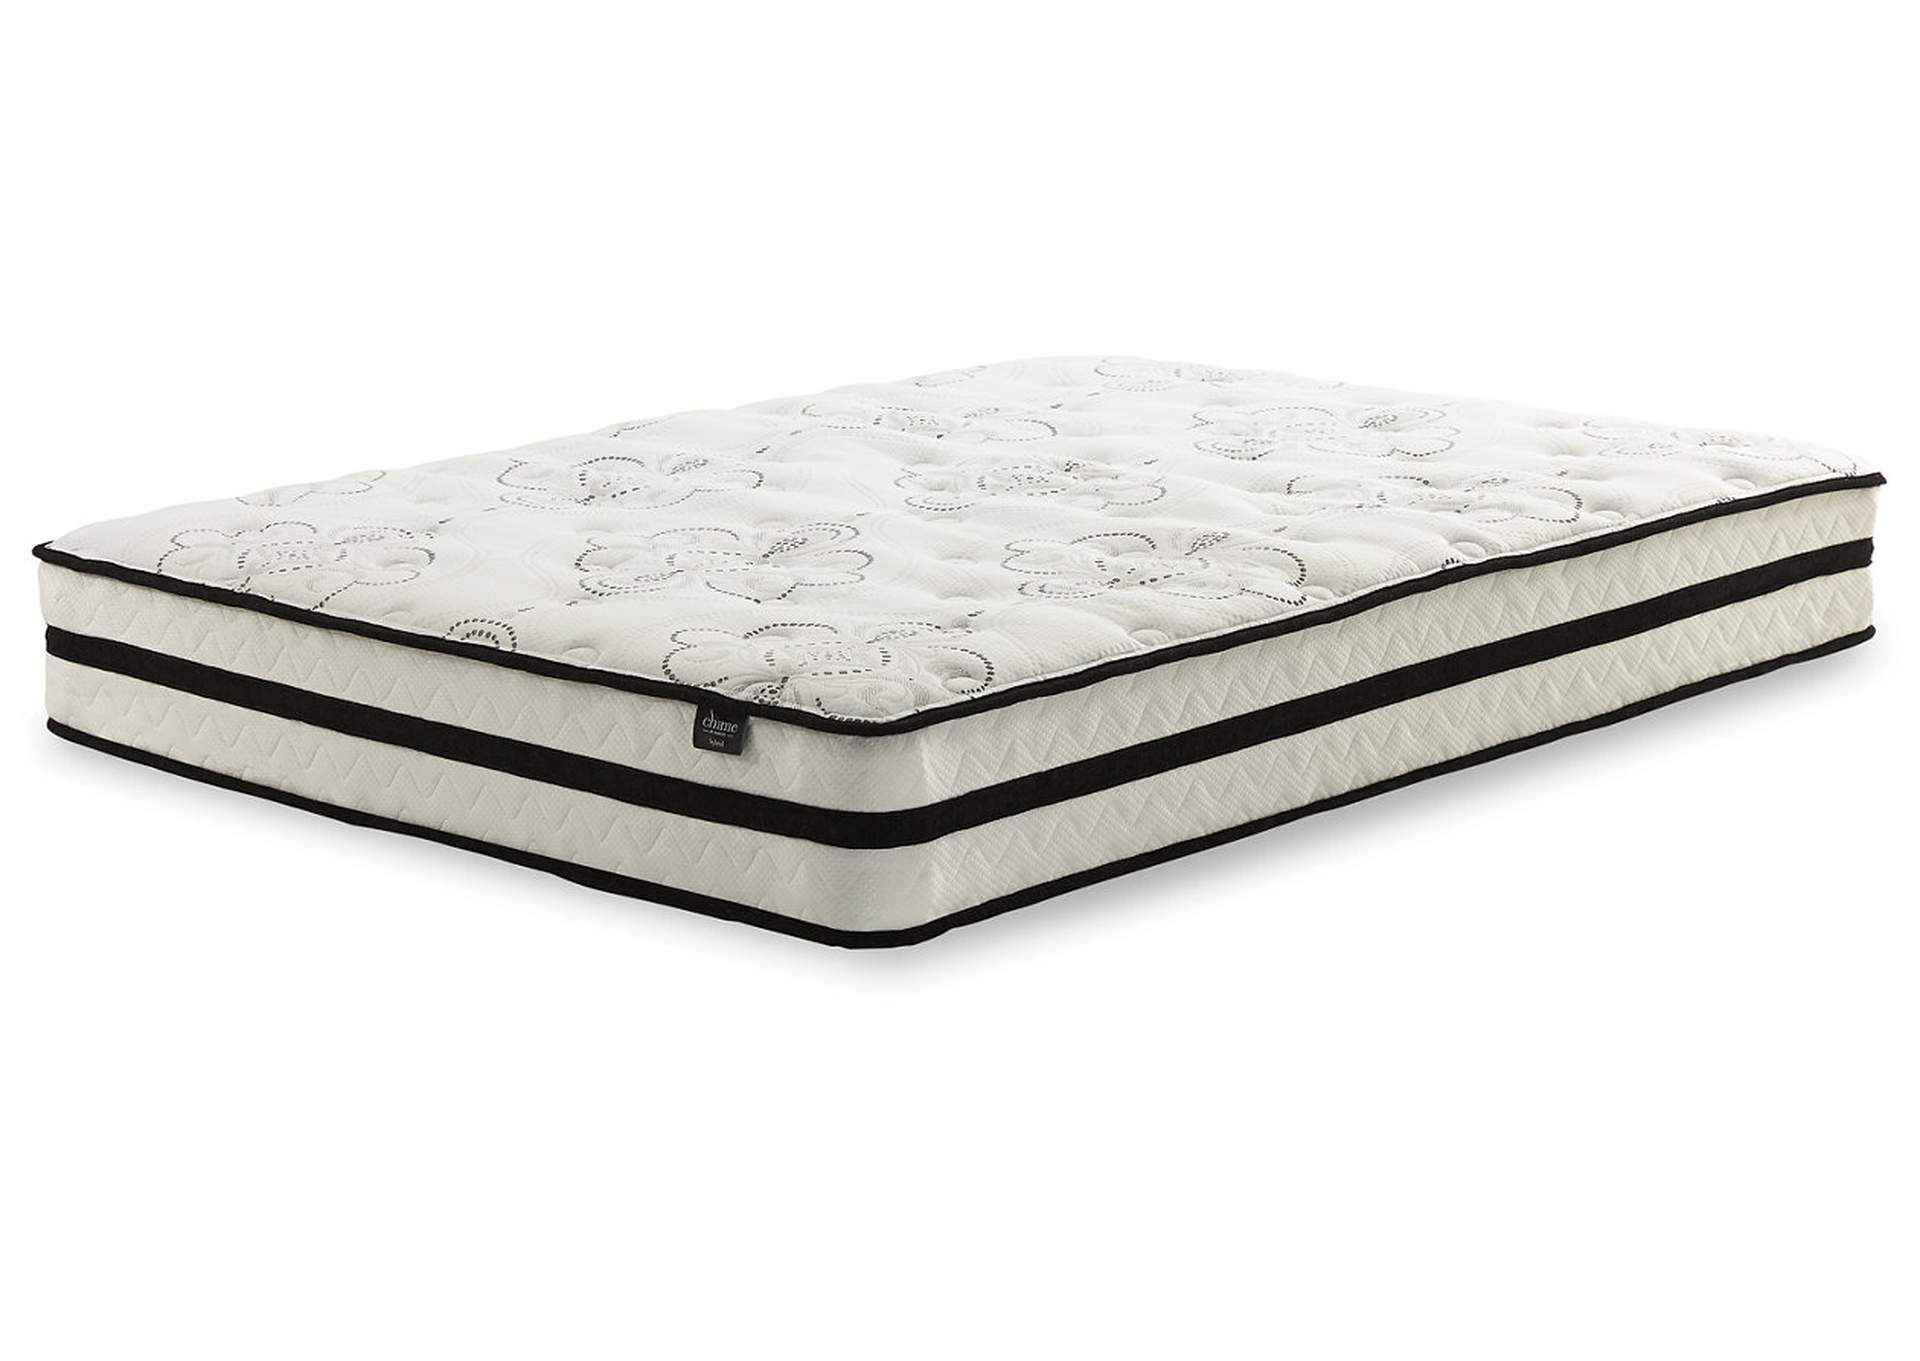 Chime 10 Inch Hybrid 10 Inch Queen Mattress and Pillow,Sierra Sleep by Ashley